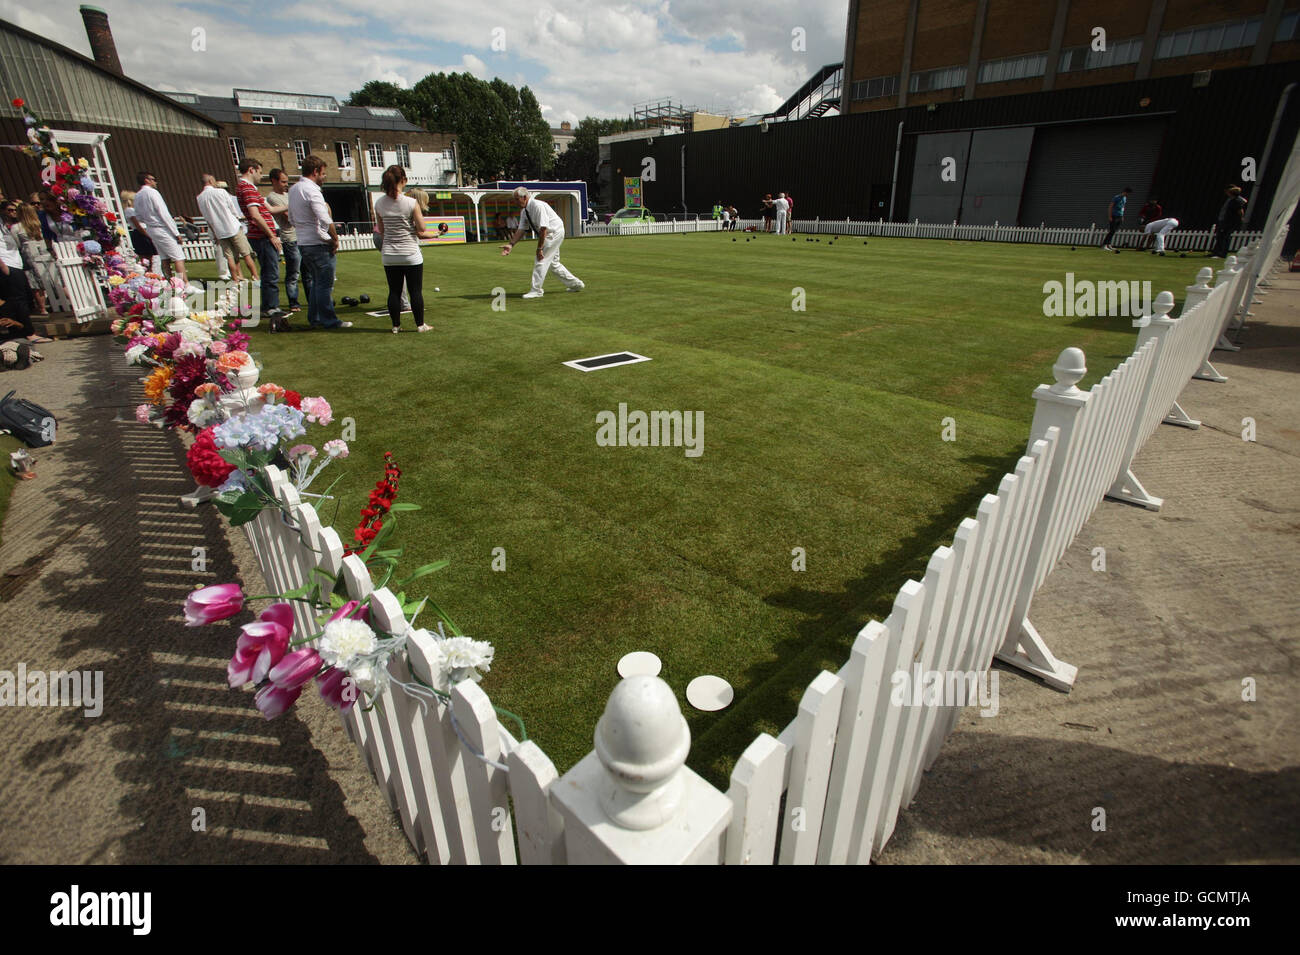 Vauxhall Motors Bowling Club - London. Memeber of the public take part in a bowling match for 'Bowl on the Summer', off Brick Lane in east London. Stock Photo